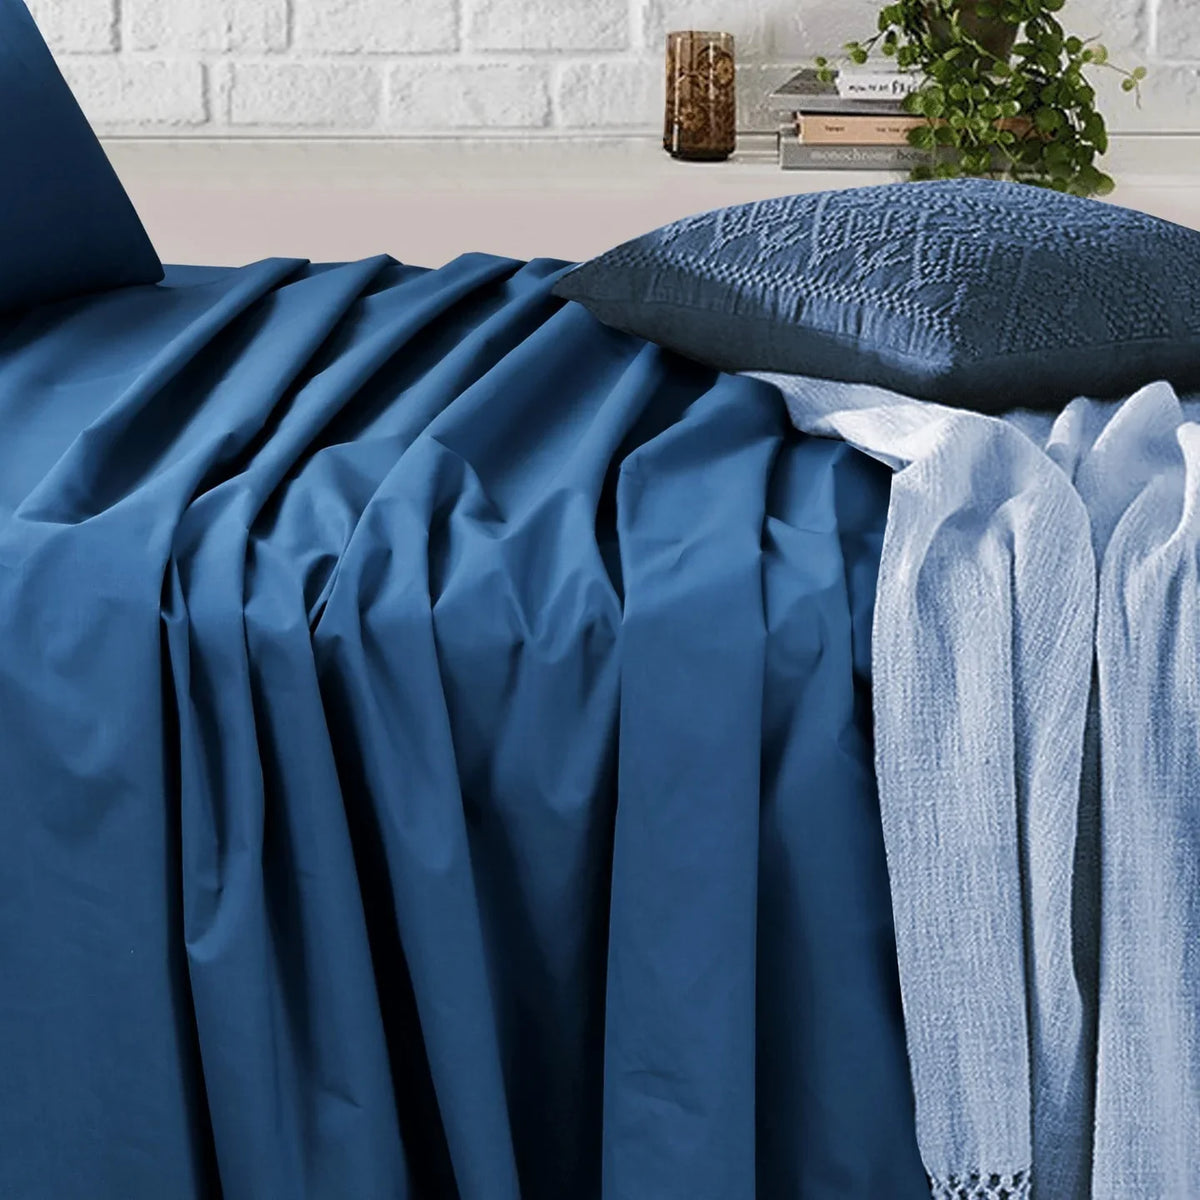 Flat And Fitted Bedsheets Set With Pillowcases -Blue